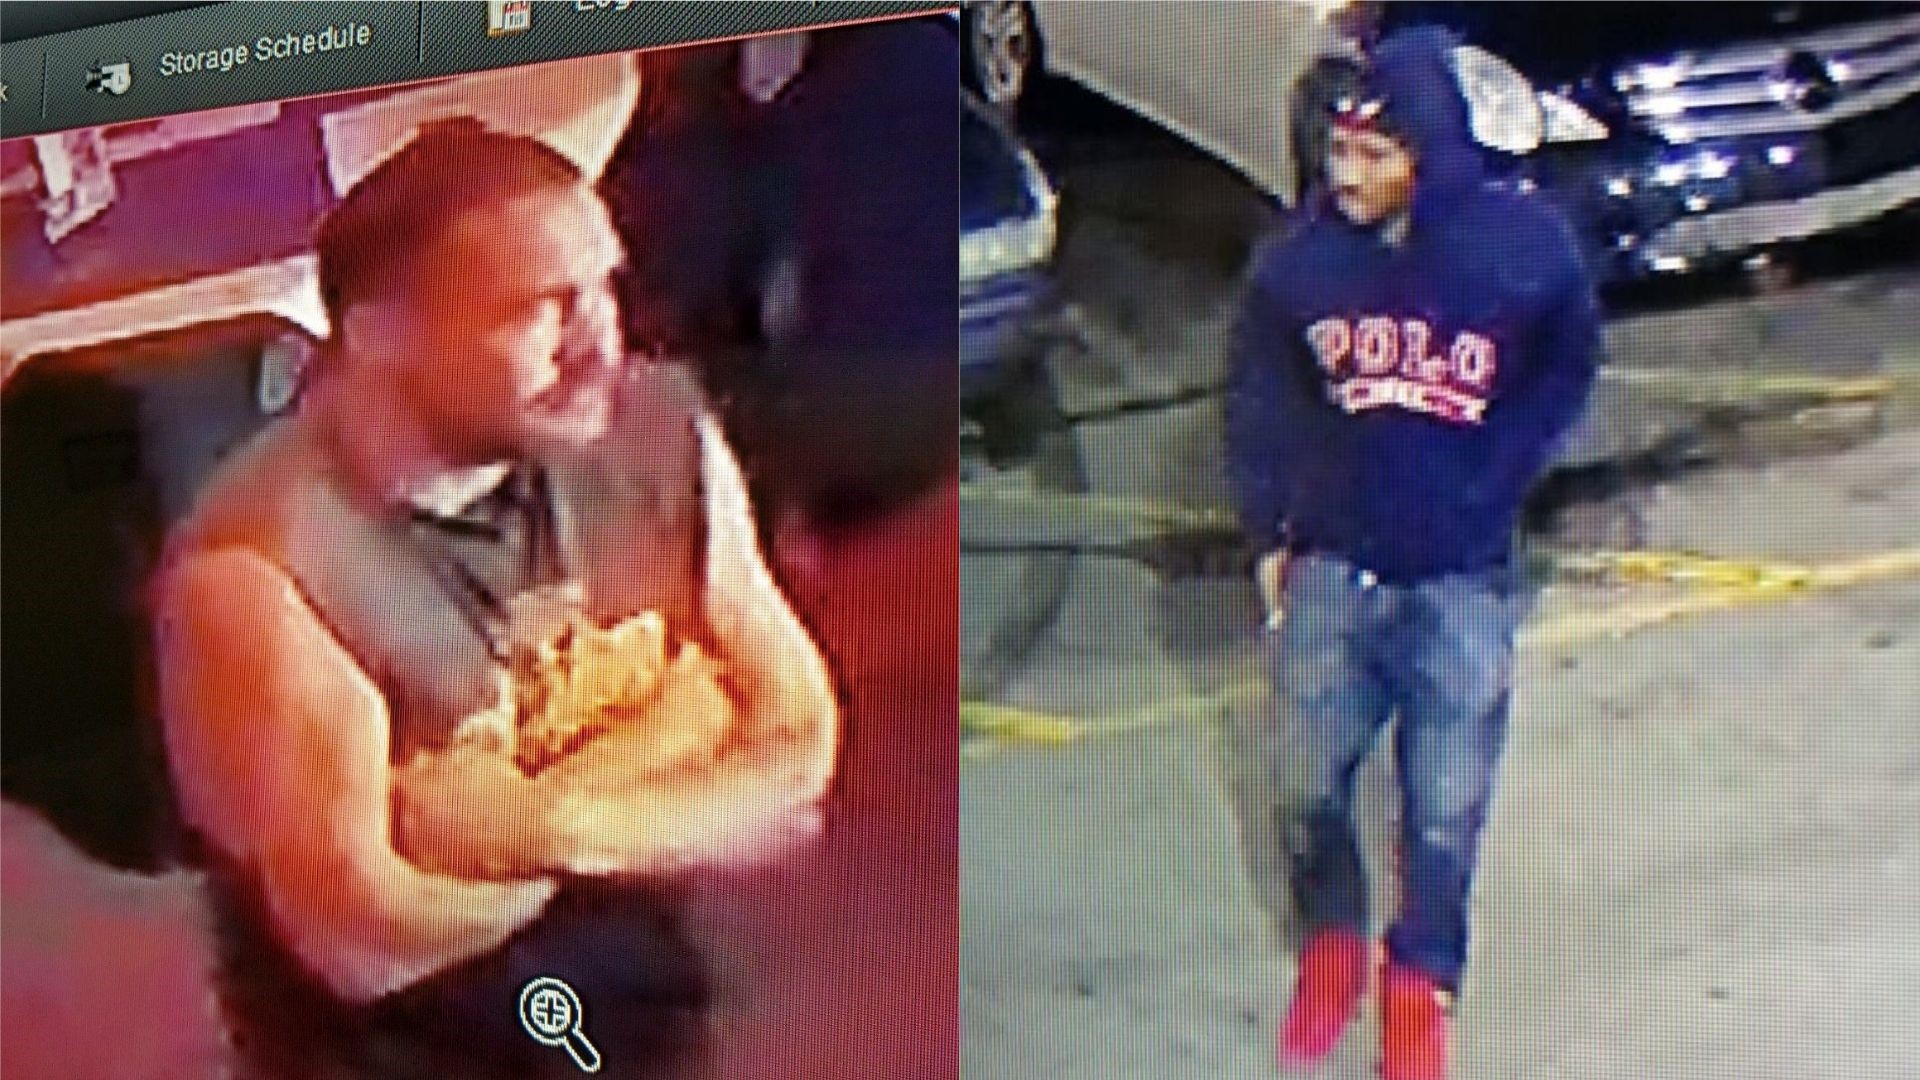 Crooks Wanted for $20k Theft